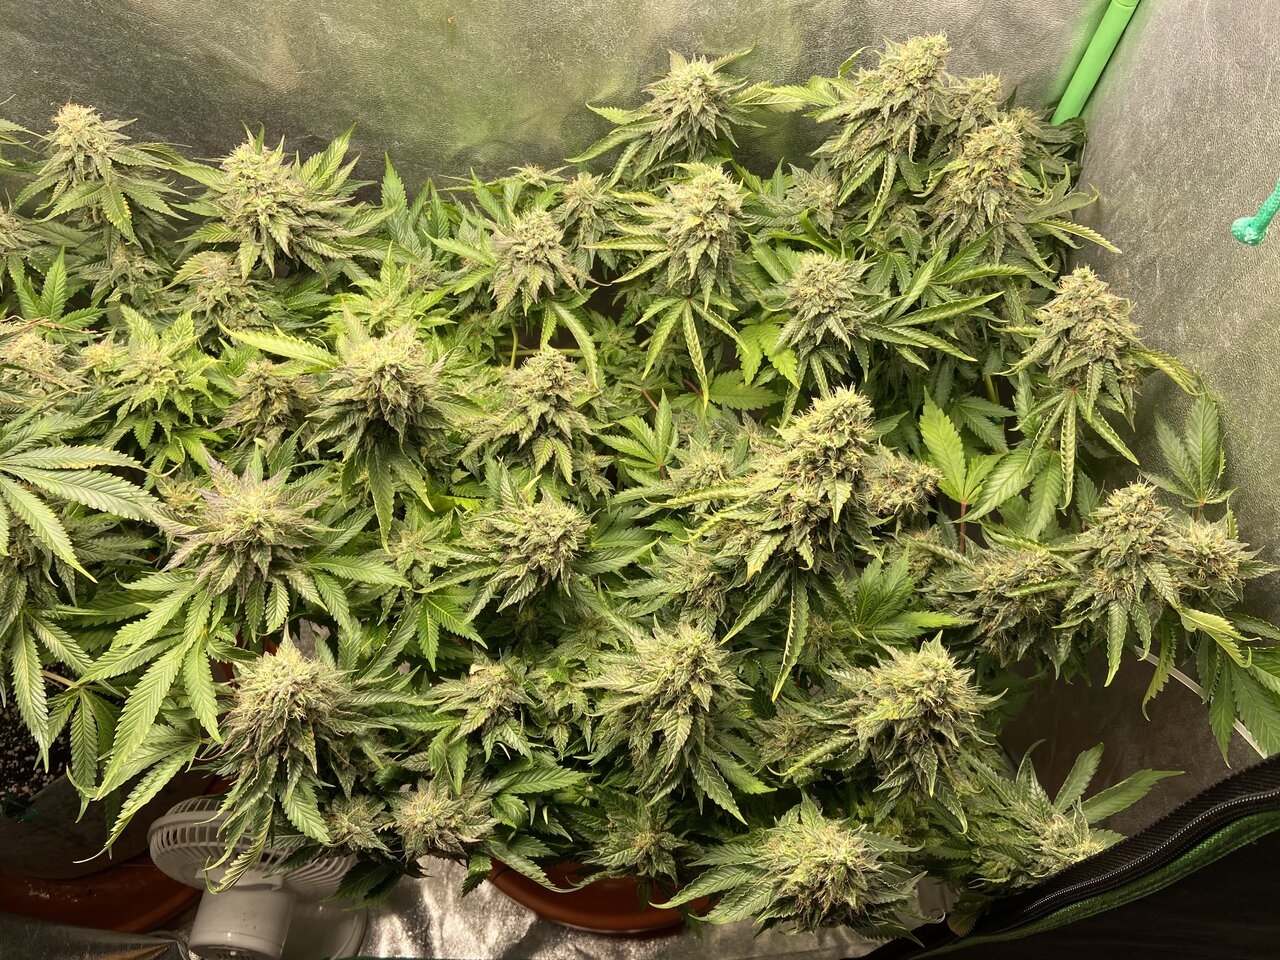 Chemdawg #4. A bit over 5 weeks. Bigger plant.